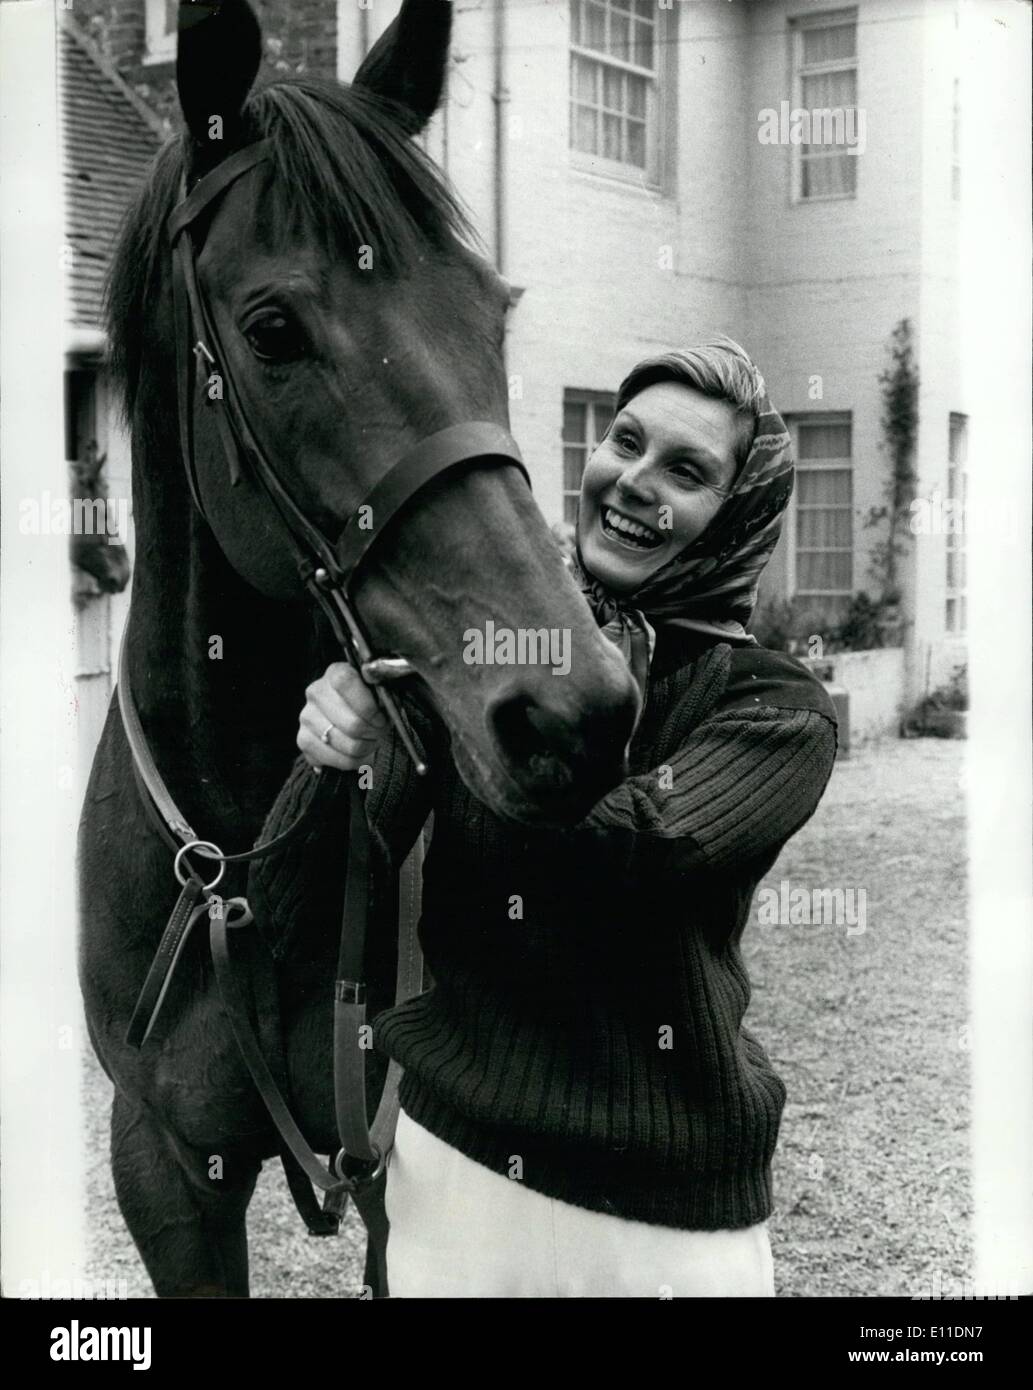 May 05, 1977 - Angela Rippon To Take Up Horse Racing: Angela Rippon the BBC Television newscaster - the girl of many talents hit the read again yesterday by getting her jockey club license for horse racing. The night before, Saturday, she was hosting the Eurovision Song Contest. She was out riding a horse called Maxi's Taxi,. this is the first time she had been on a racehorse which is classed in the form books as a suitable mount for an apprentice. On May 17th at Goodwood Stock Photo